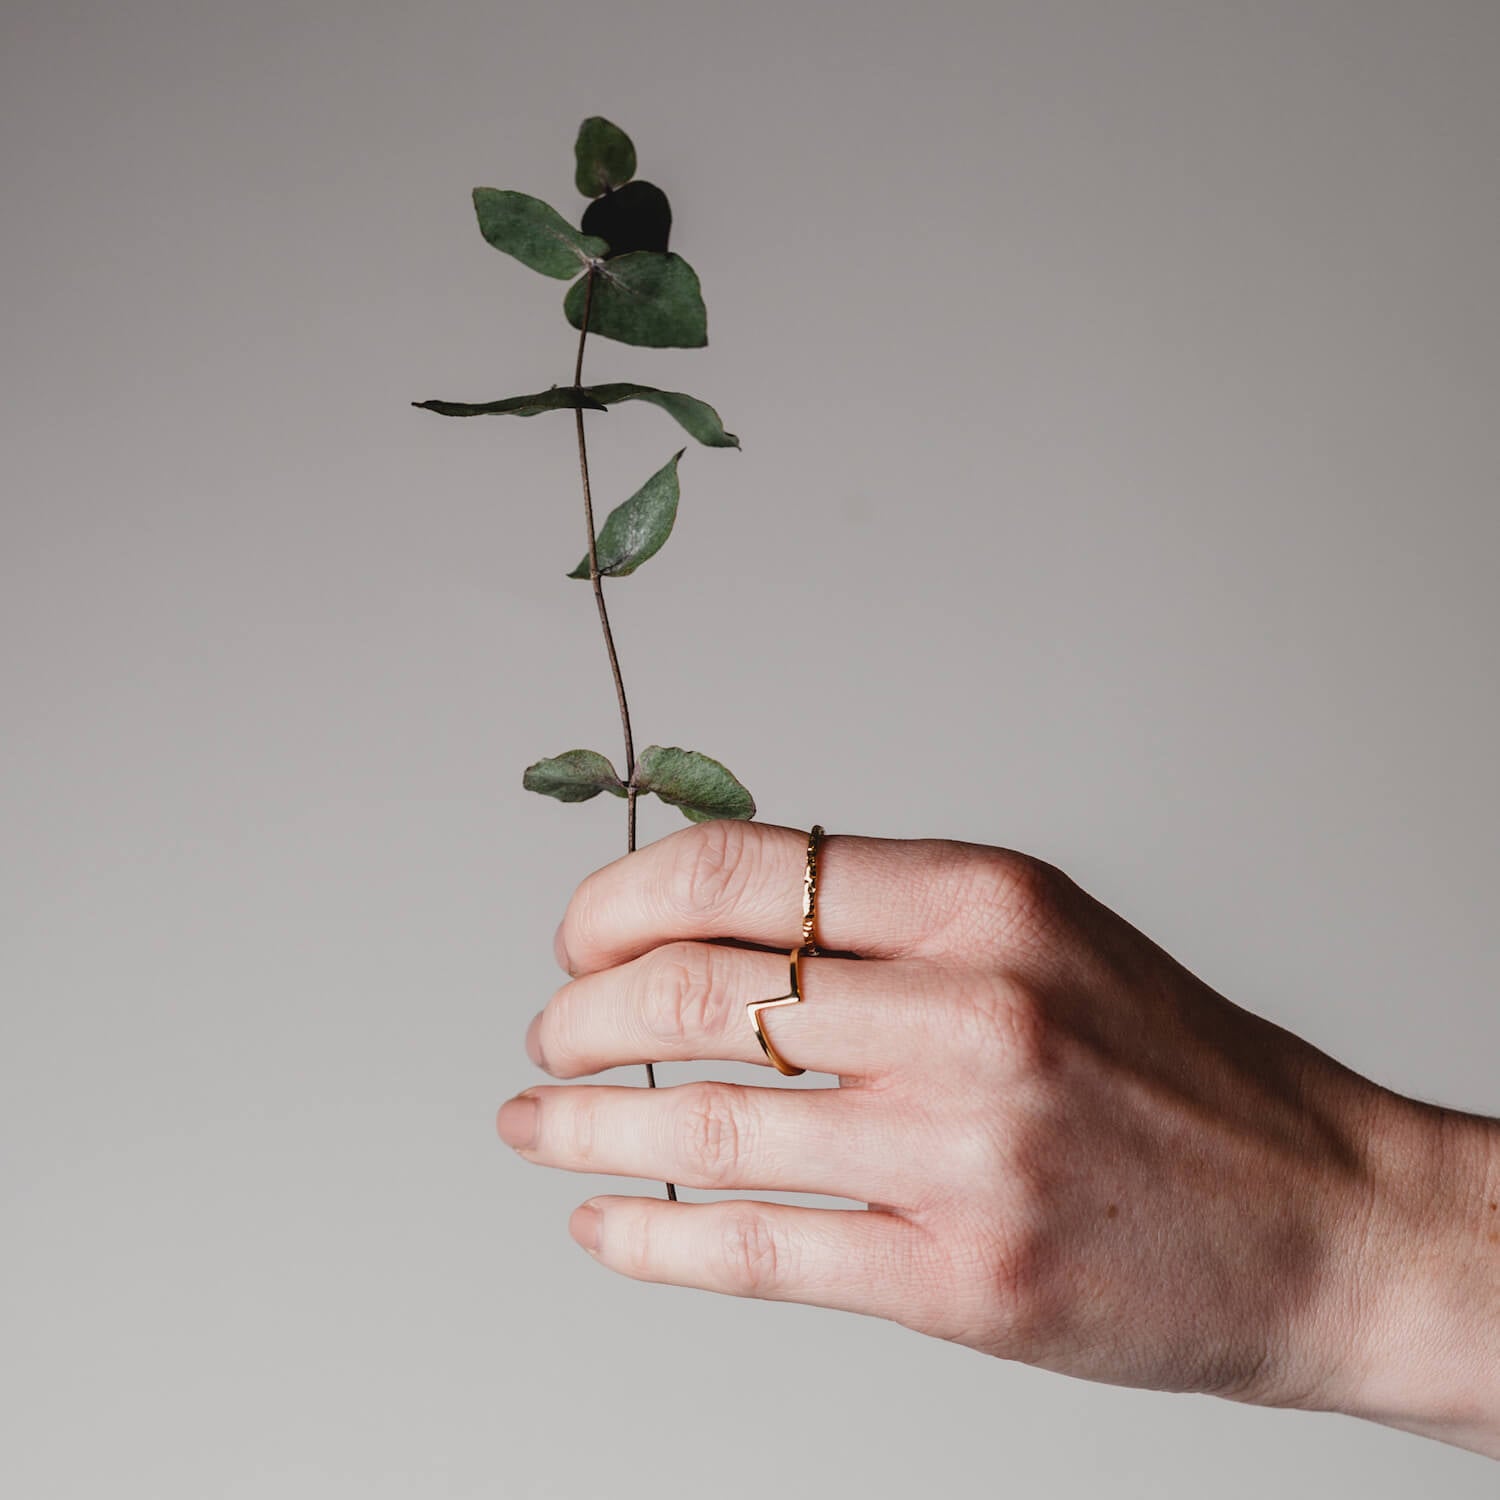 A woman's hand wearing two Matthew Calvin rings, one with a hammered texture and one with a geometric shape